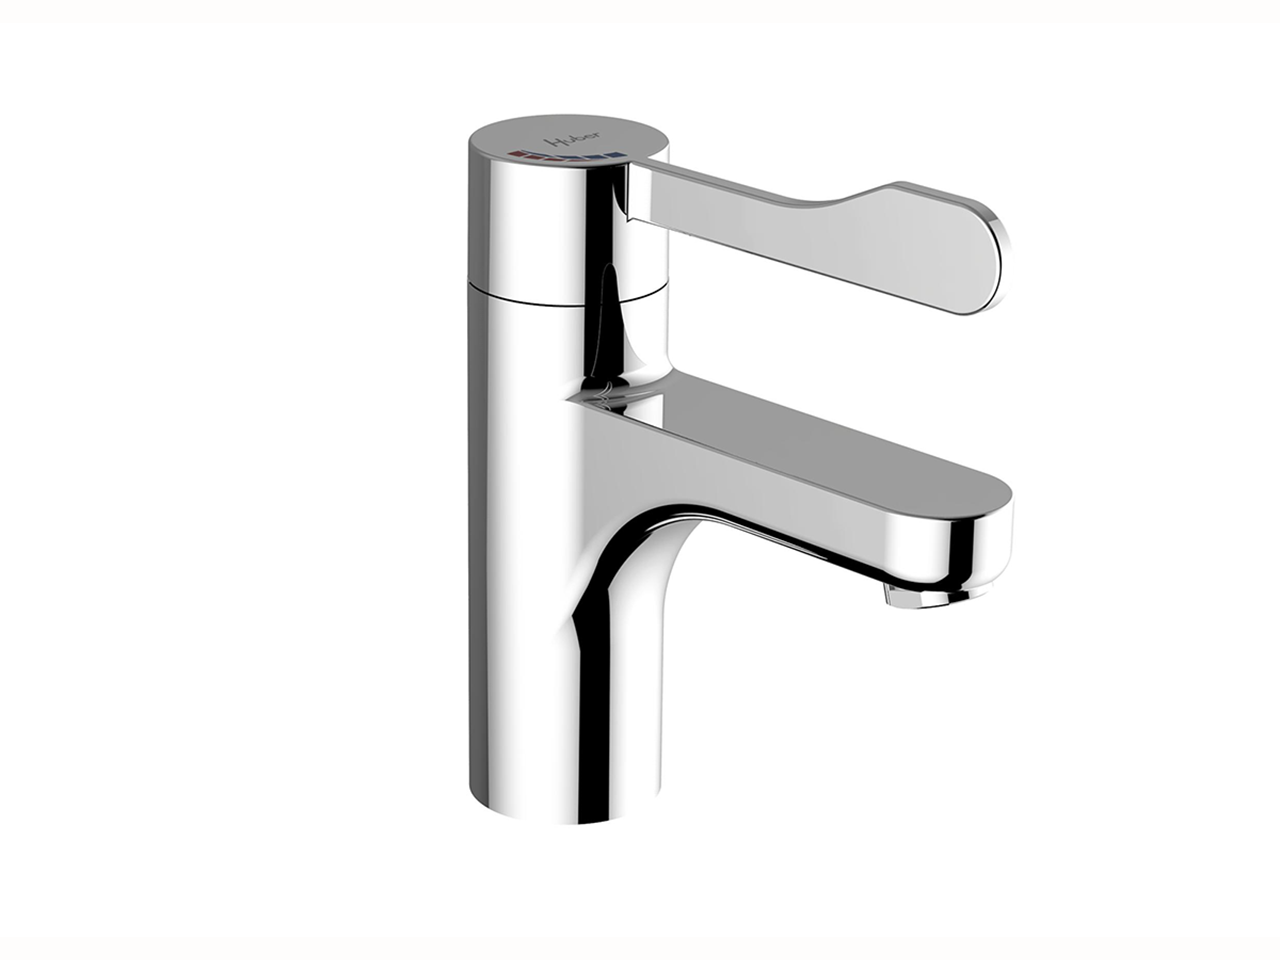 HUBERHTS Design Thermo Sequential Basin Mixer COMMUNITY